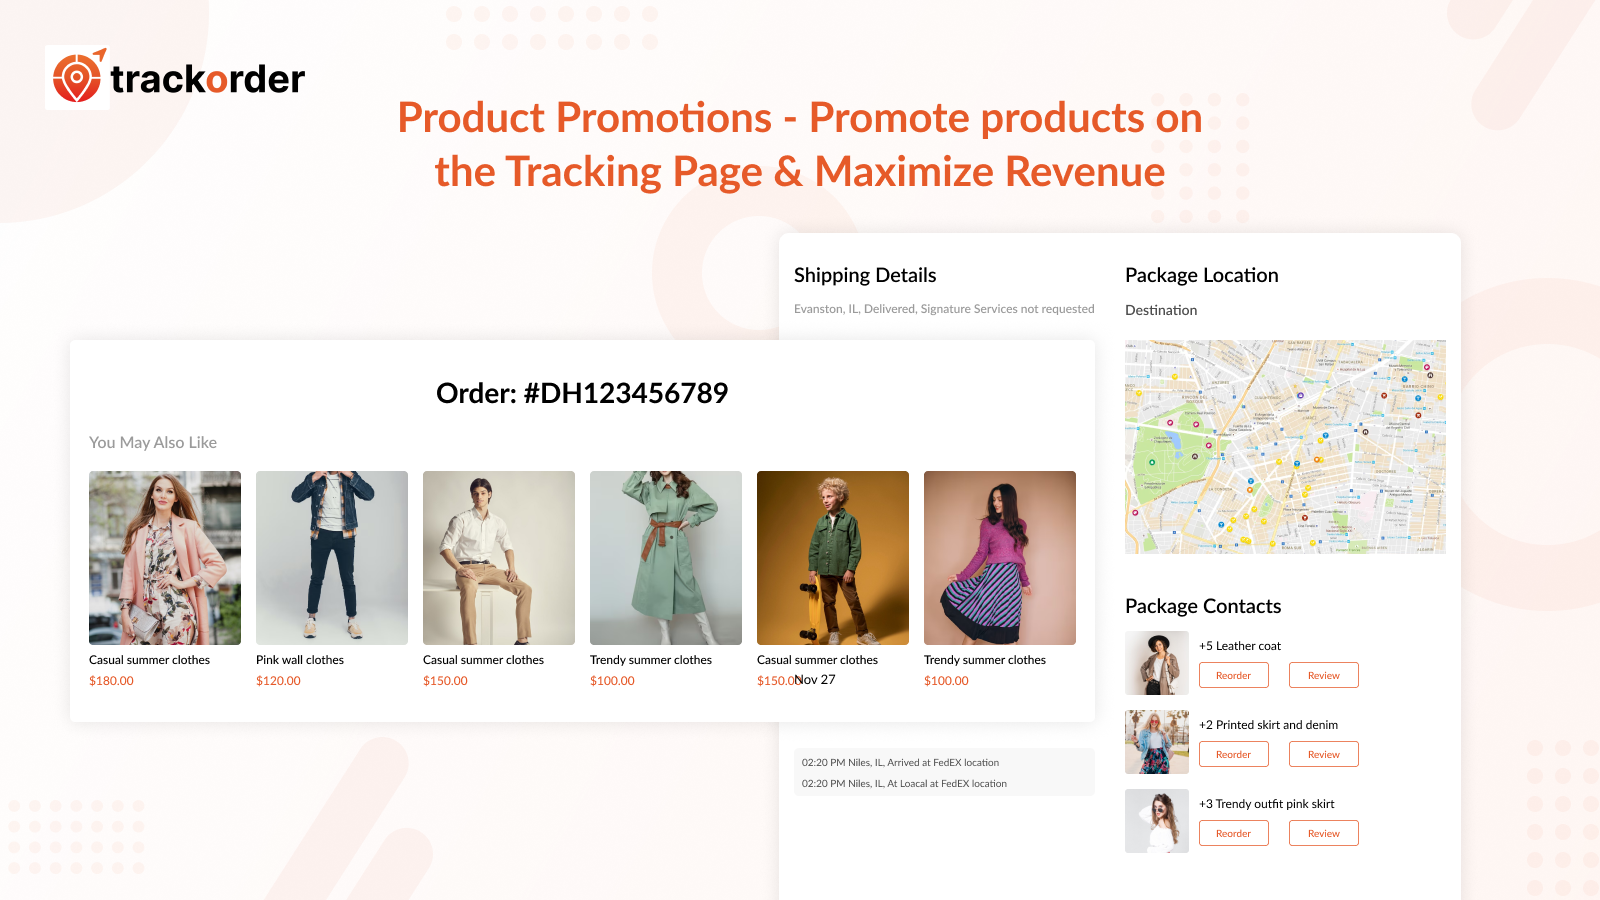 Product Promotions - Promote products on the Tracking Page & Max